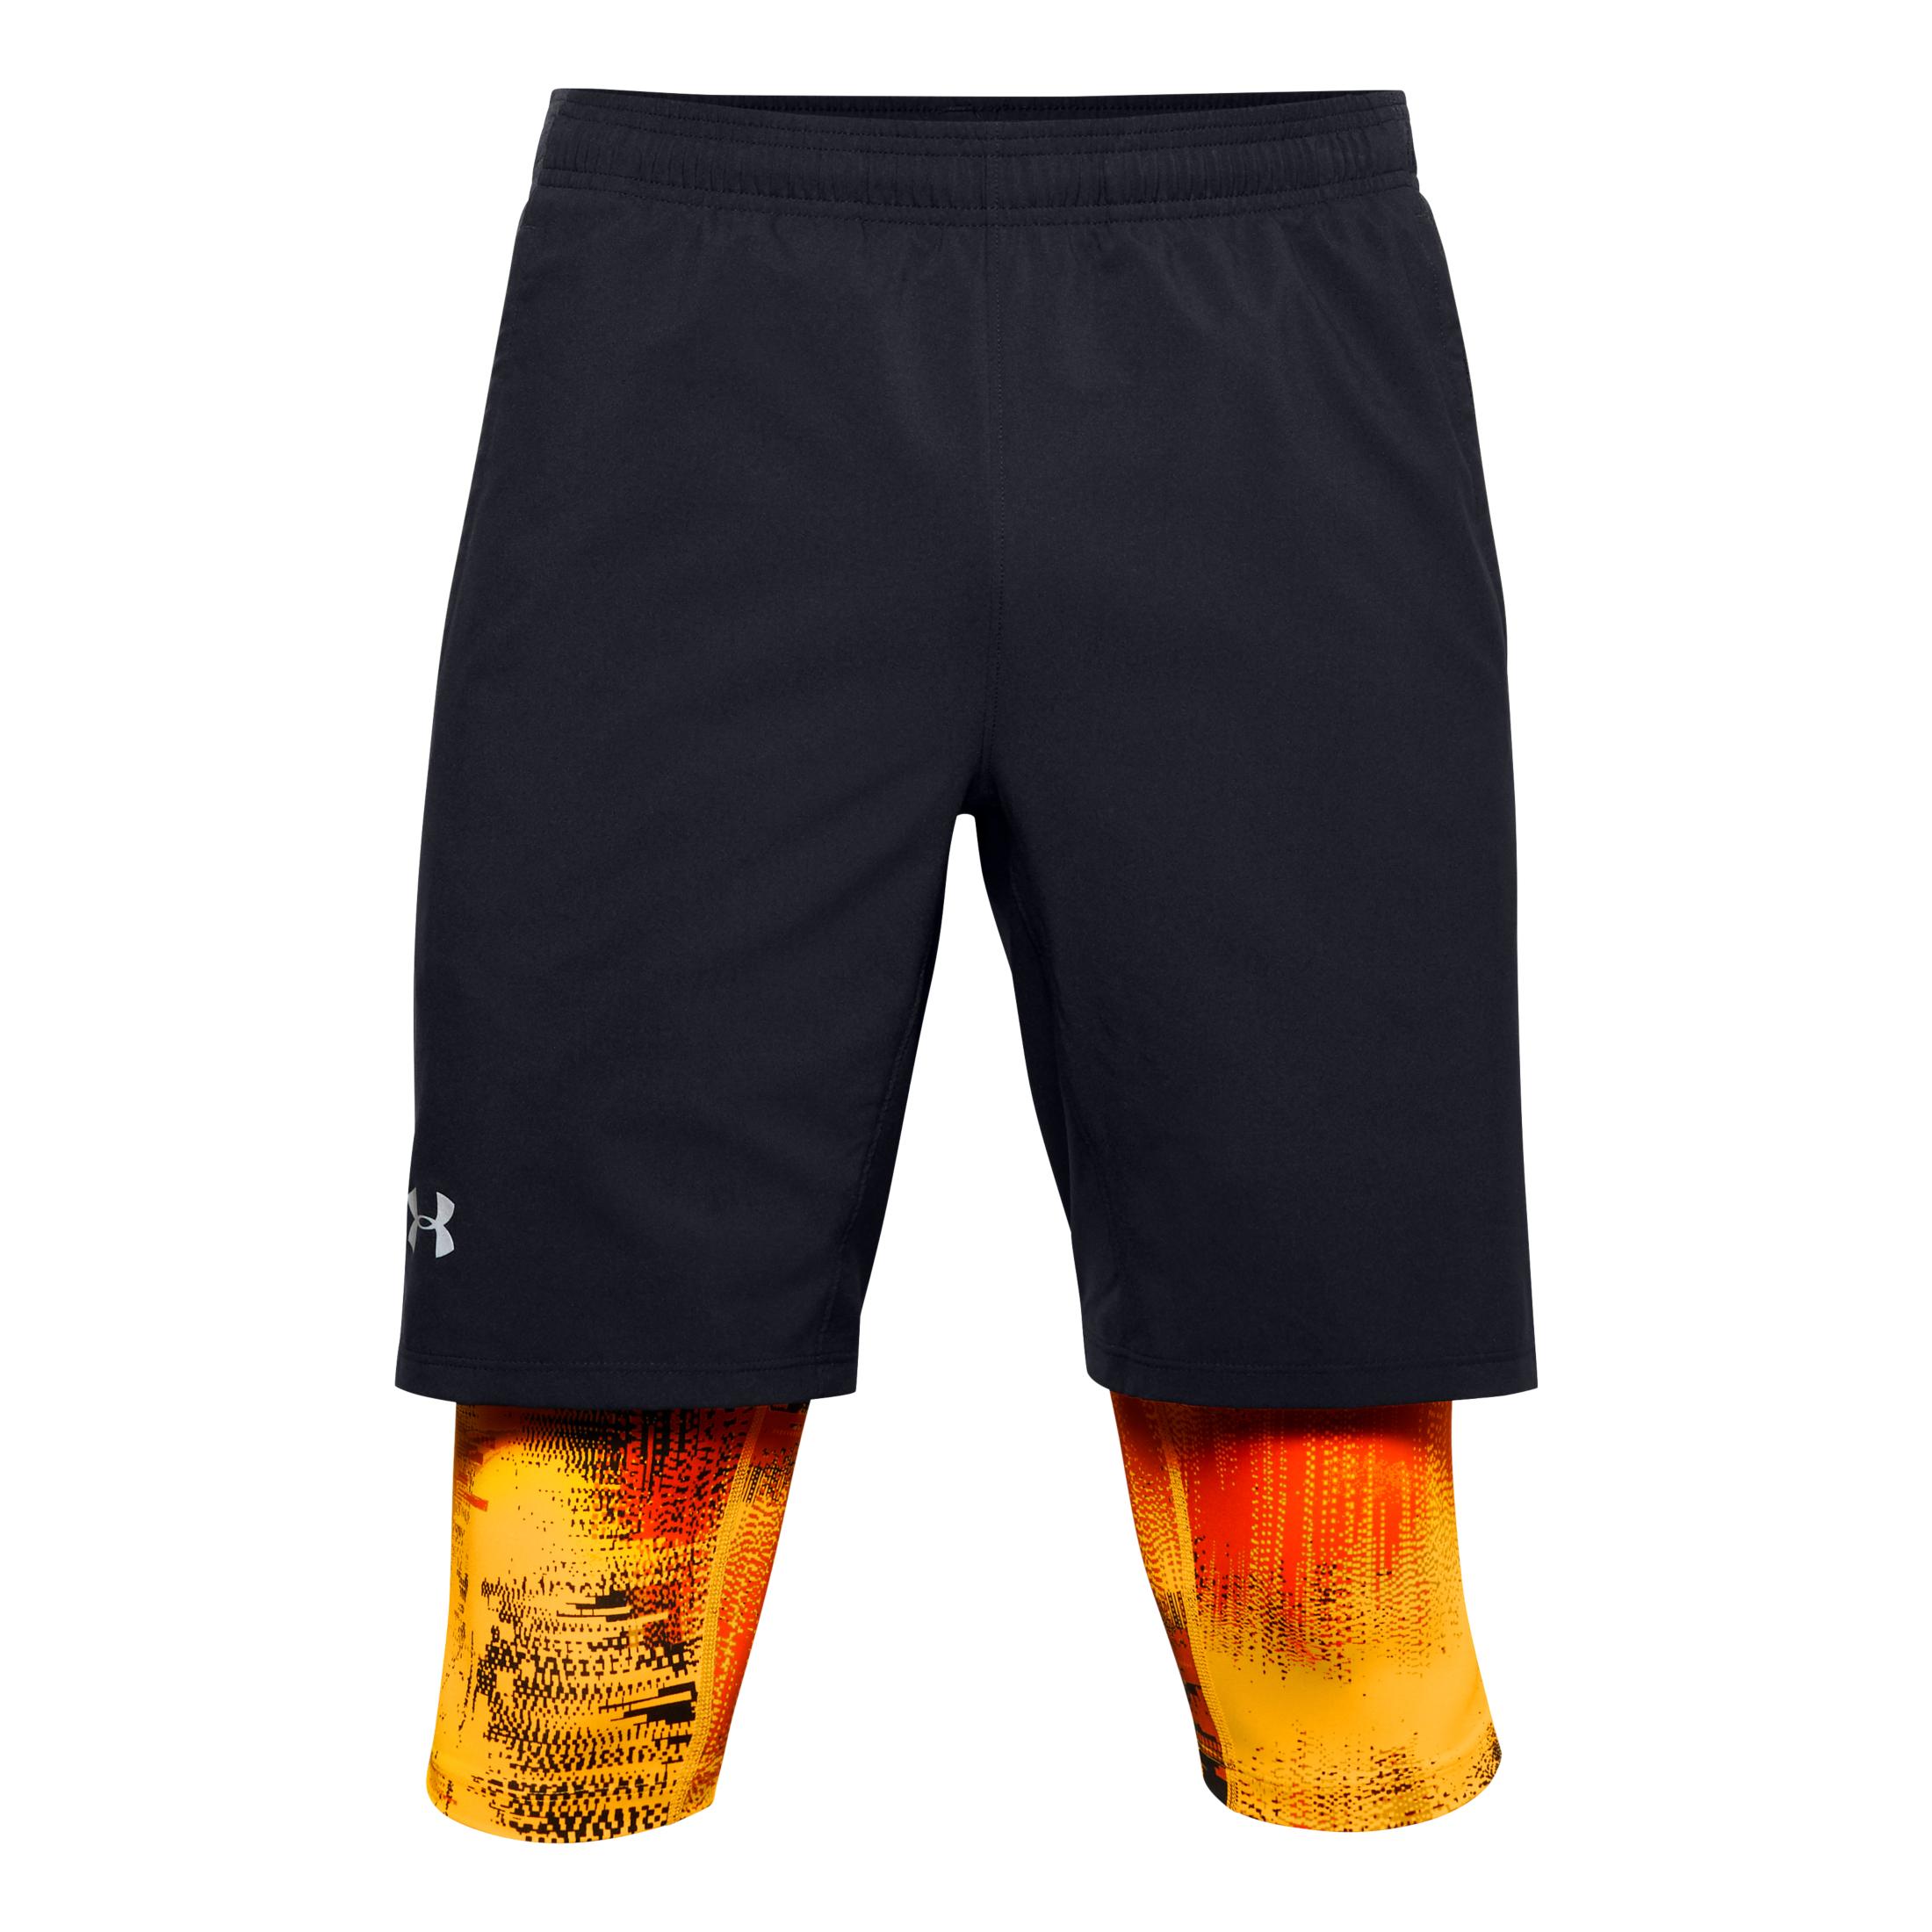 Under Armour Launch Sw Long 2in1 Printed Short Noir S 